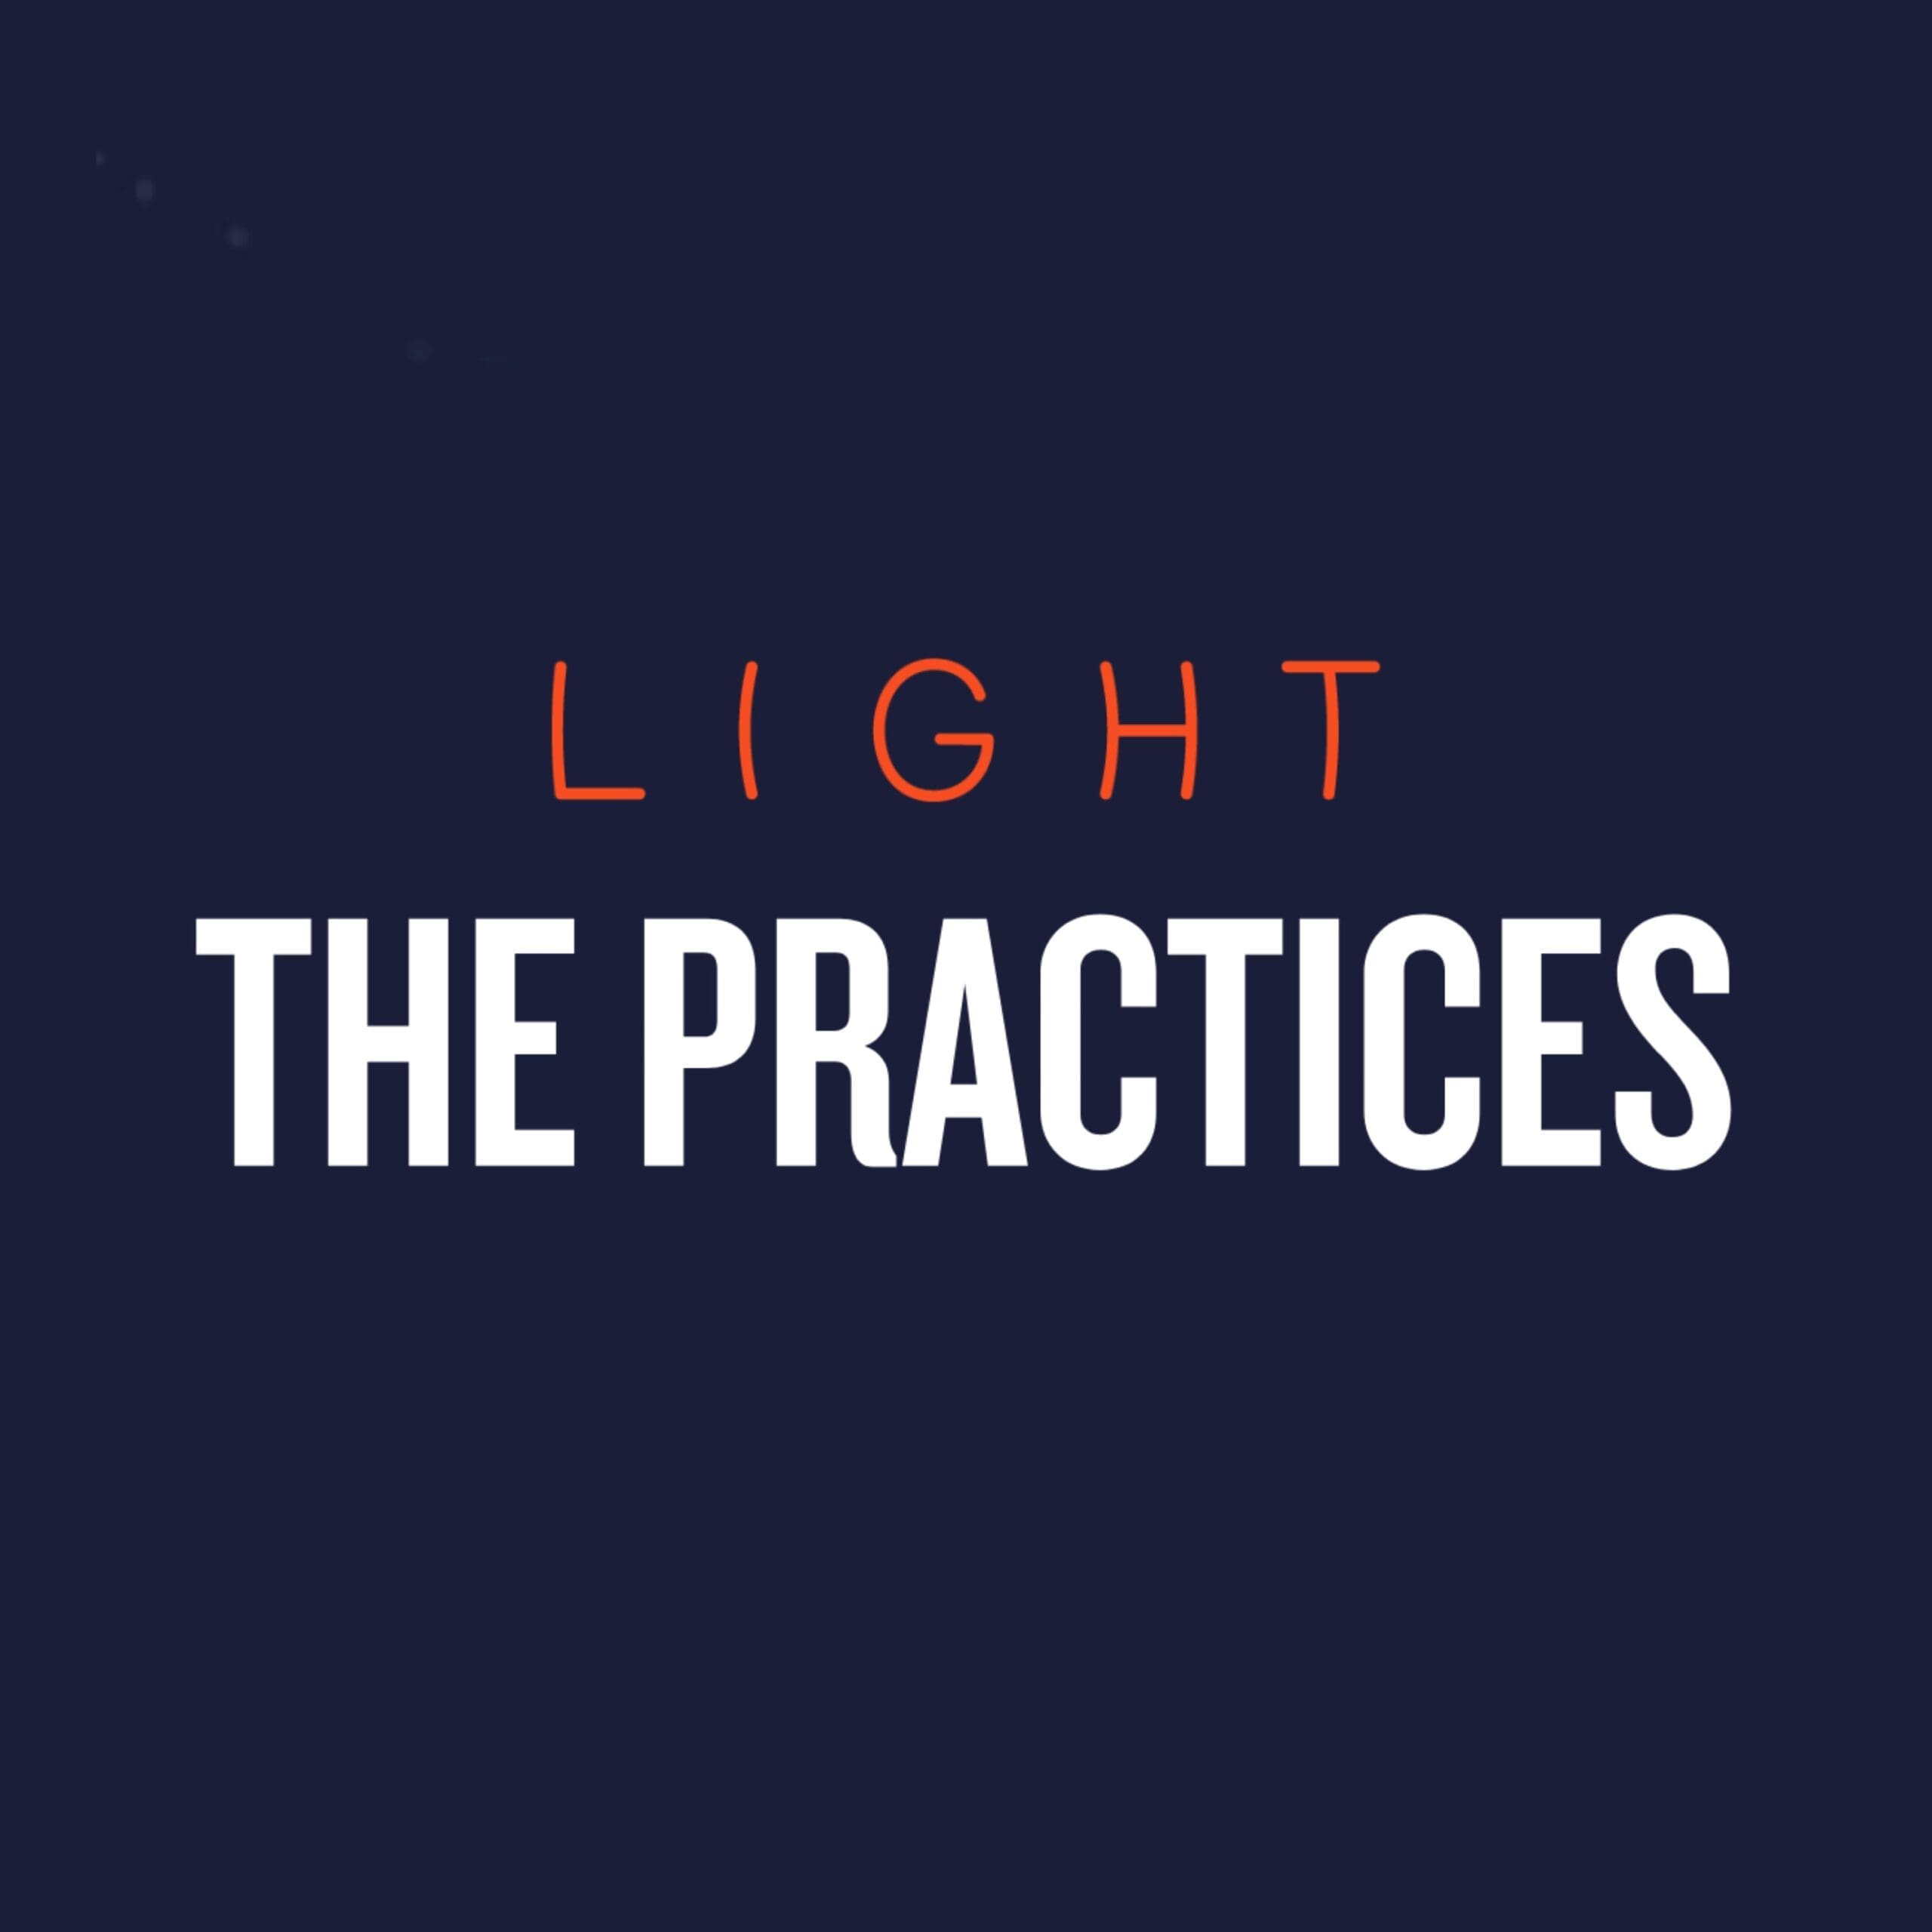 The Practices: Brought to you by Light